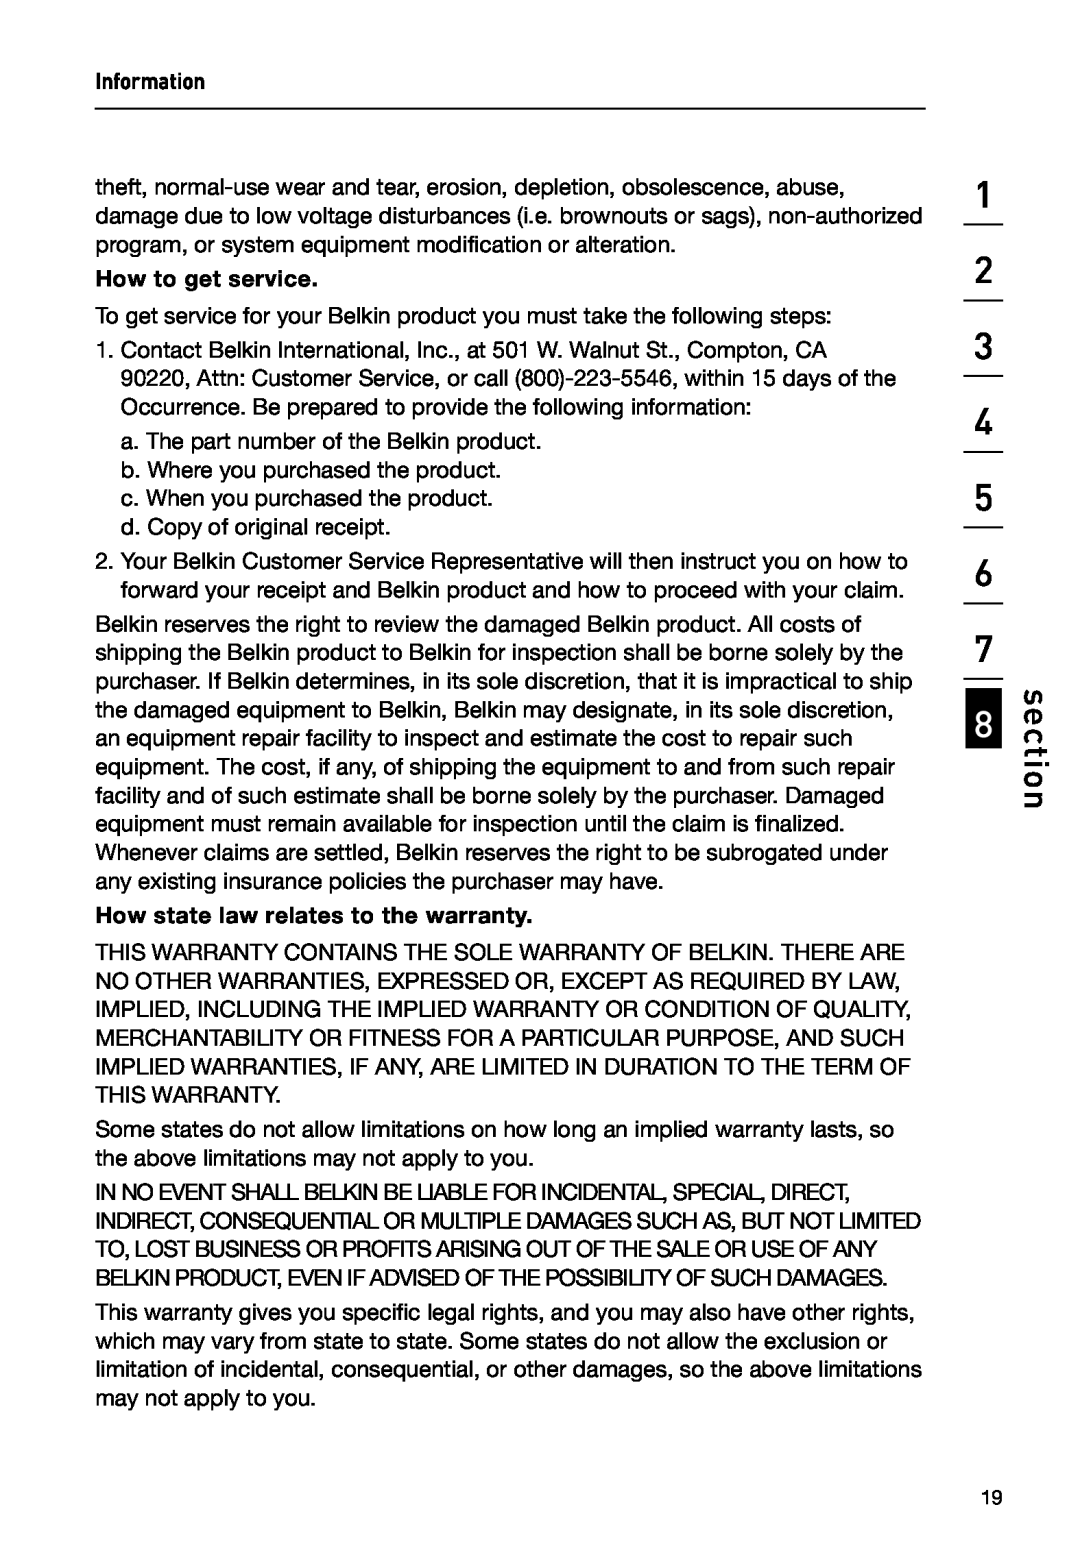 Belkin F1DB102P2 user manual section, a. The part number of the Belkin product 